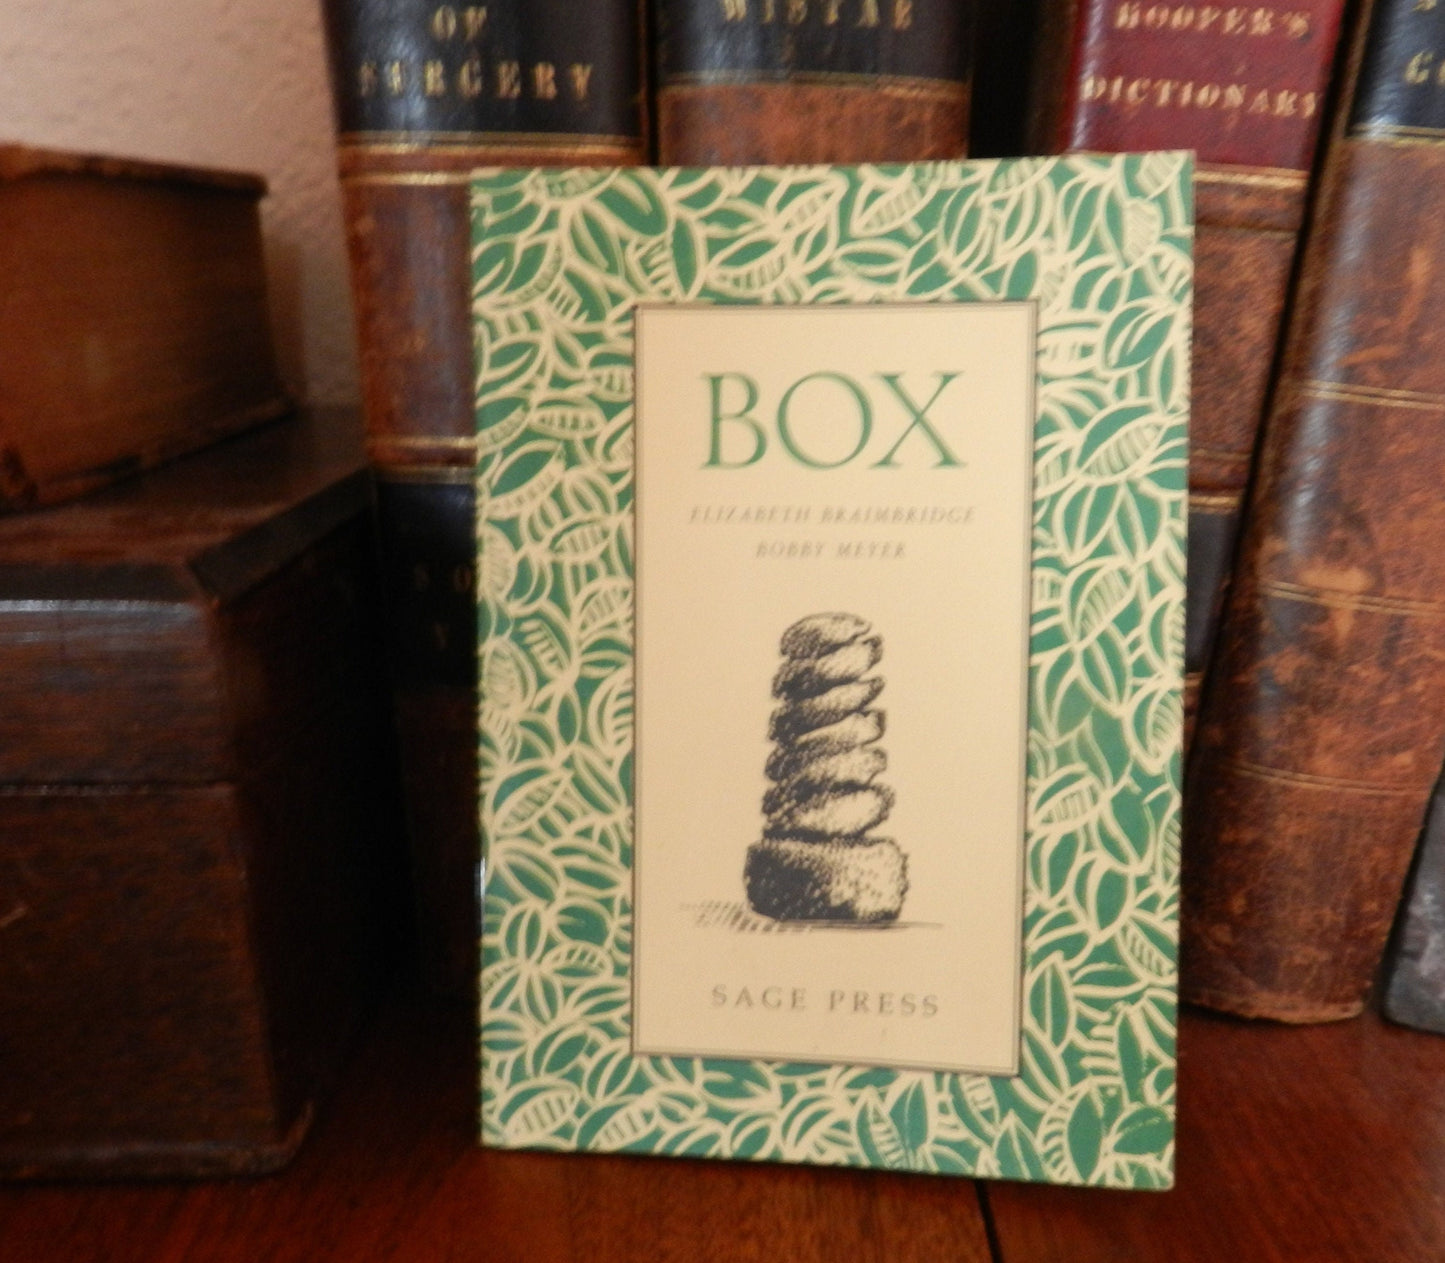 Vintage Book "Box" by Braimbridge & Meyer - 1998 First Edition First Printing Pamphlet